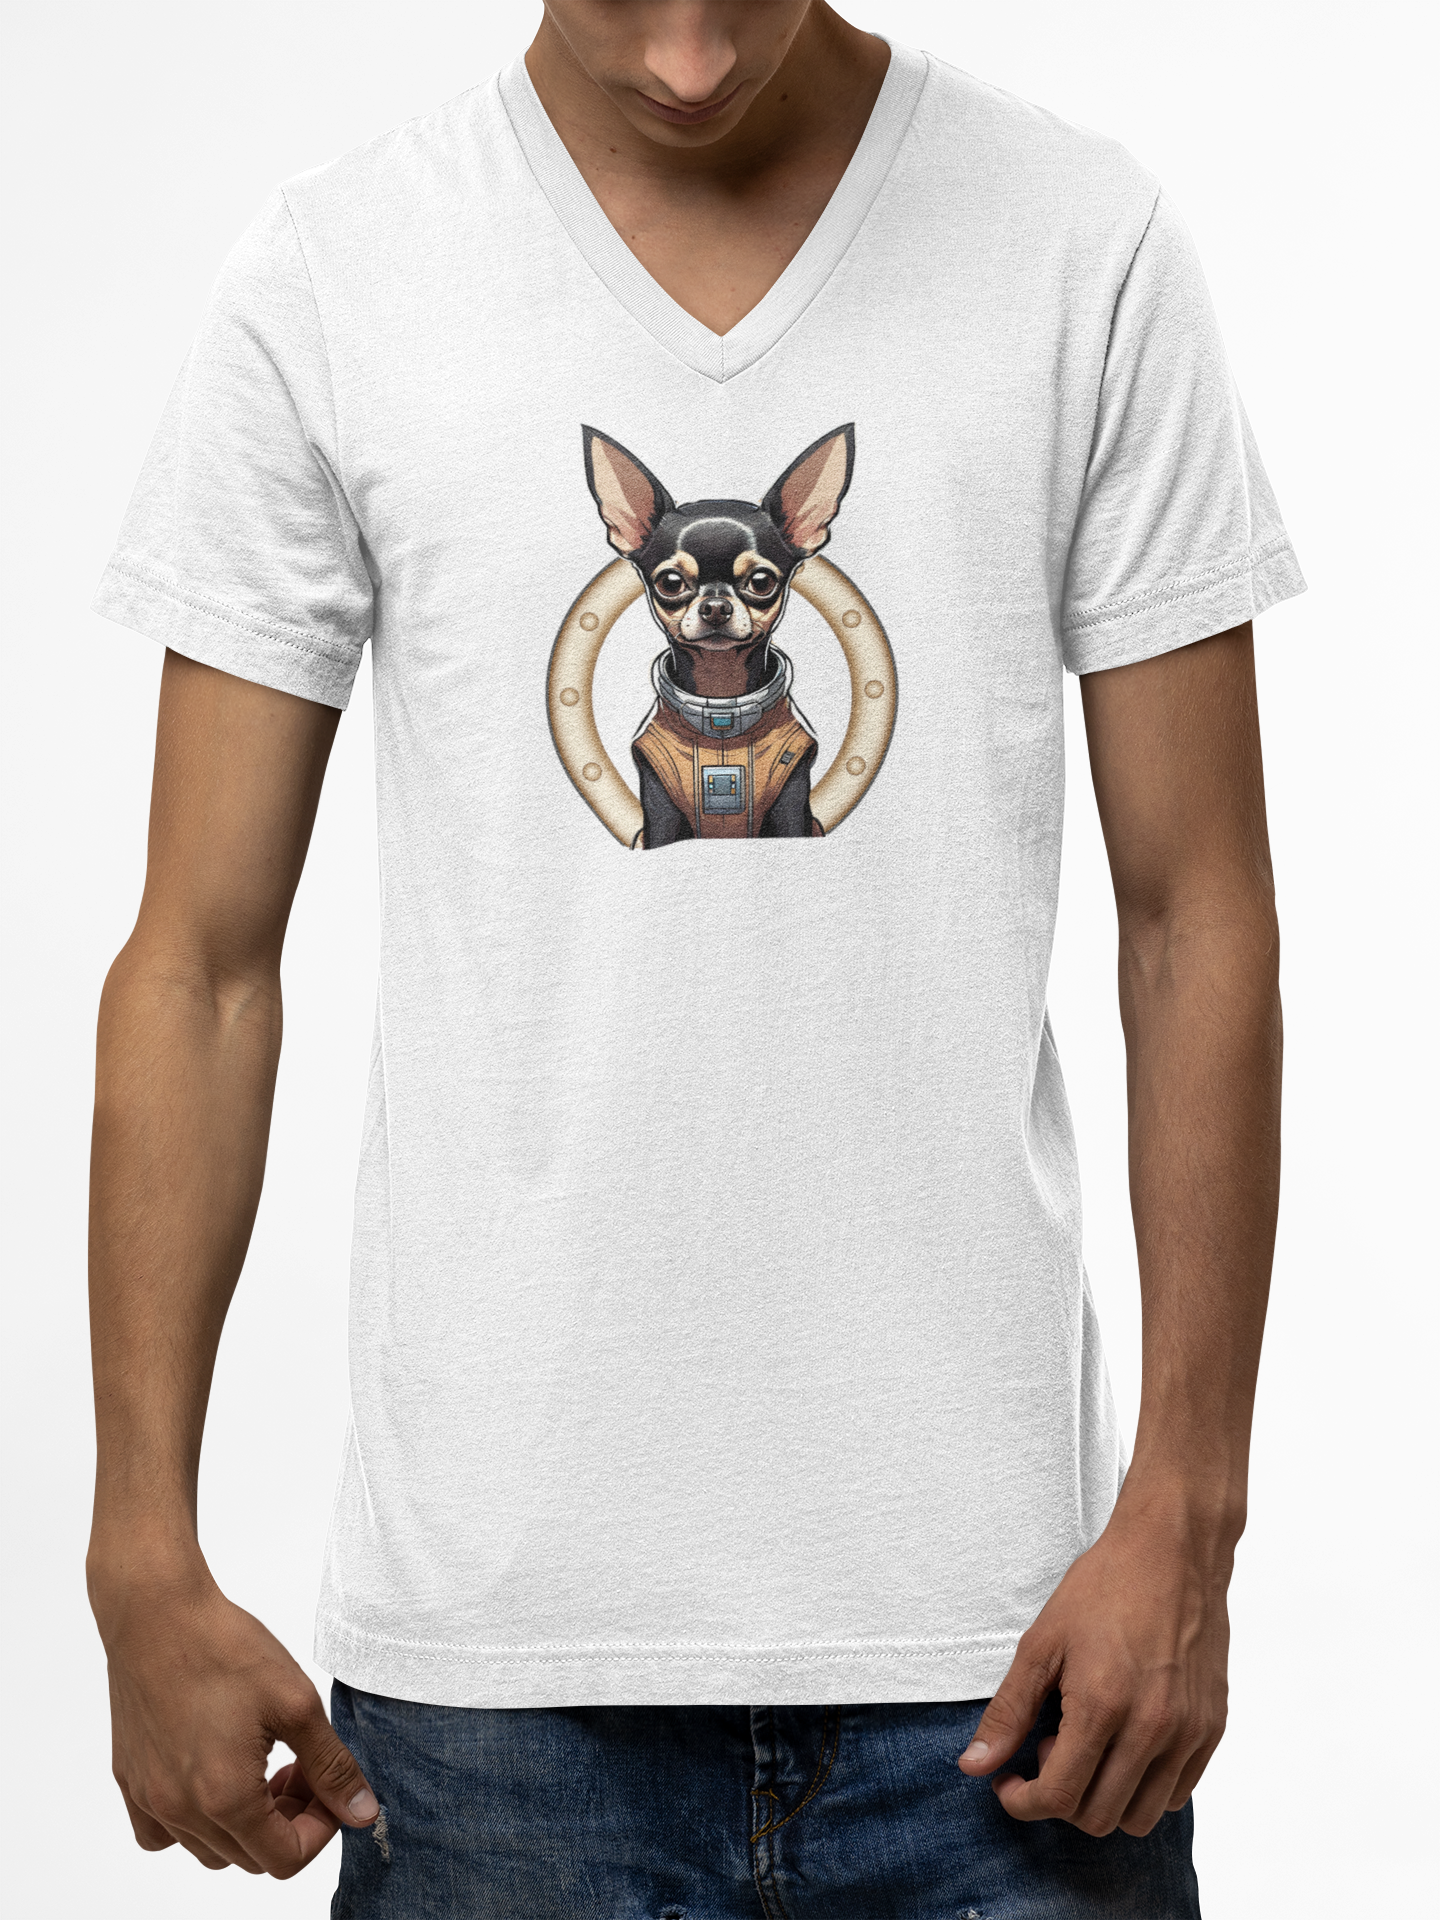 Unisex Jersey Short Sleeve V-Neck Tee with Cute Chihuahua Astronaut Design - Mockup Man